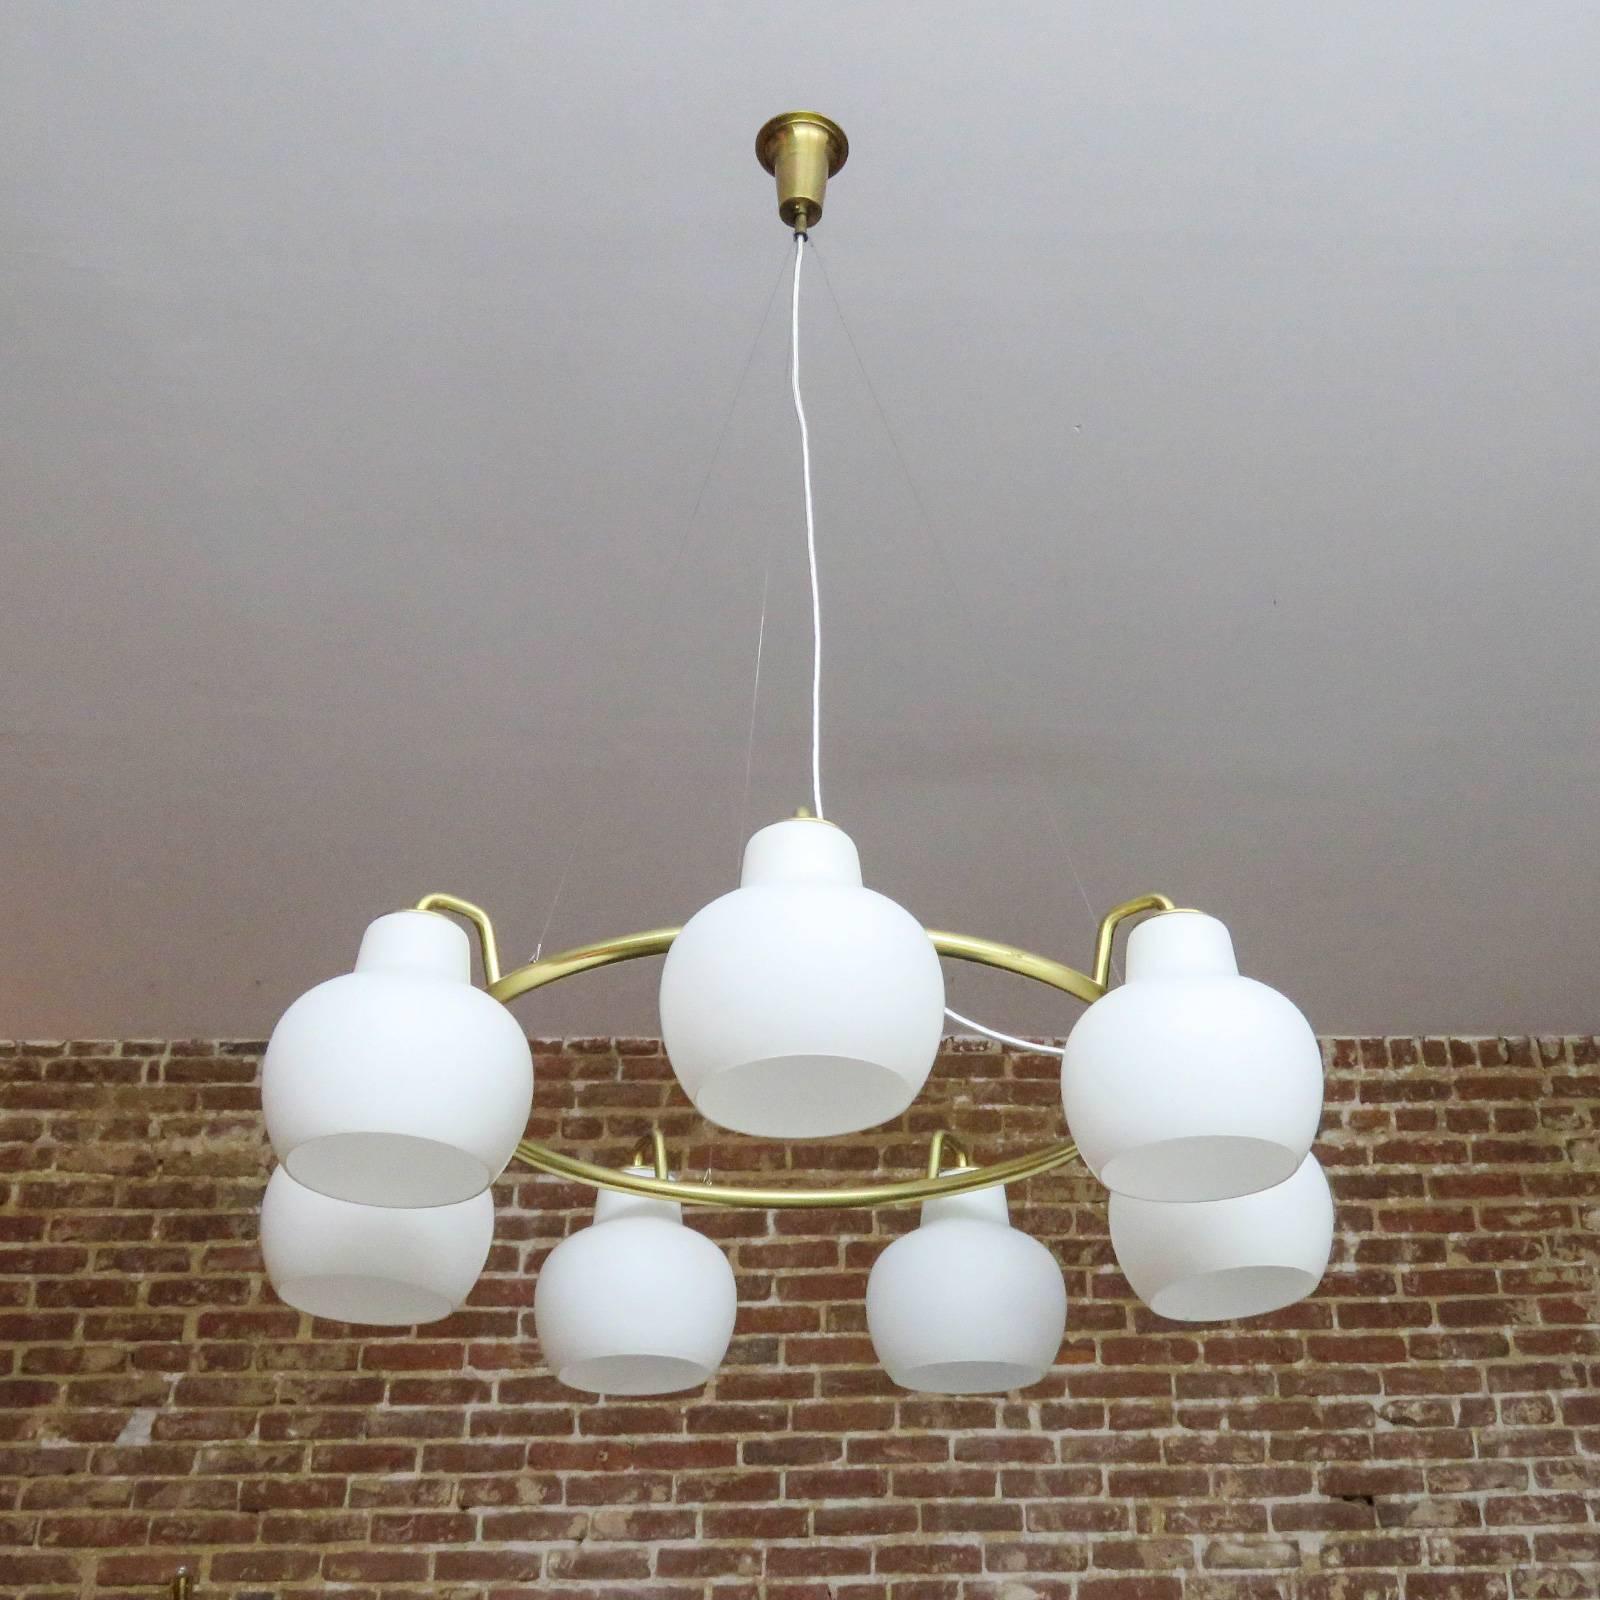 Stunning, large-scale Christiansborg / B&G ring chandelier by Vilhelm
Lauritzen, with seven white opaline glass shades on a circular brass frame
suspended from cables, height is adjustable.